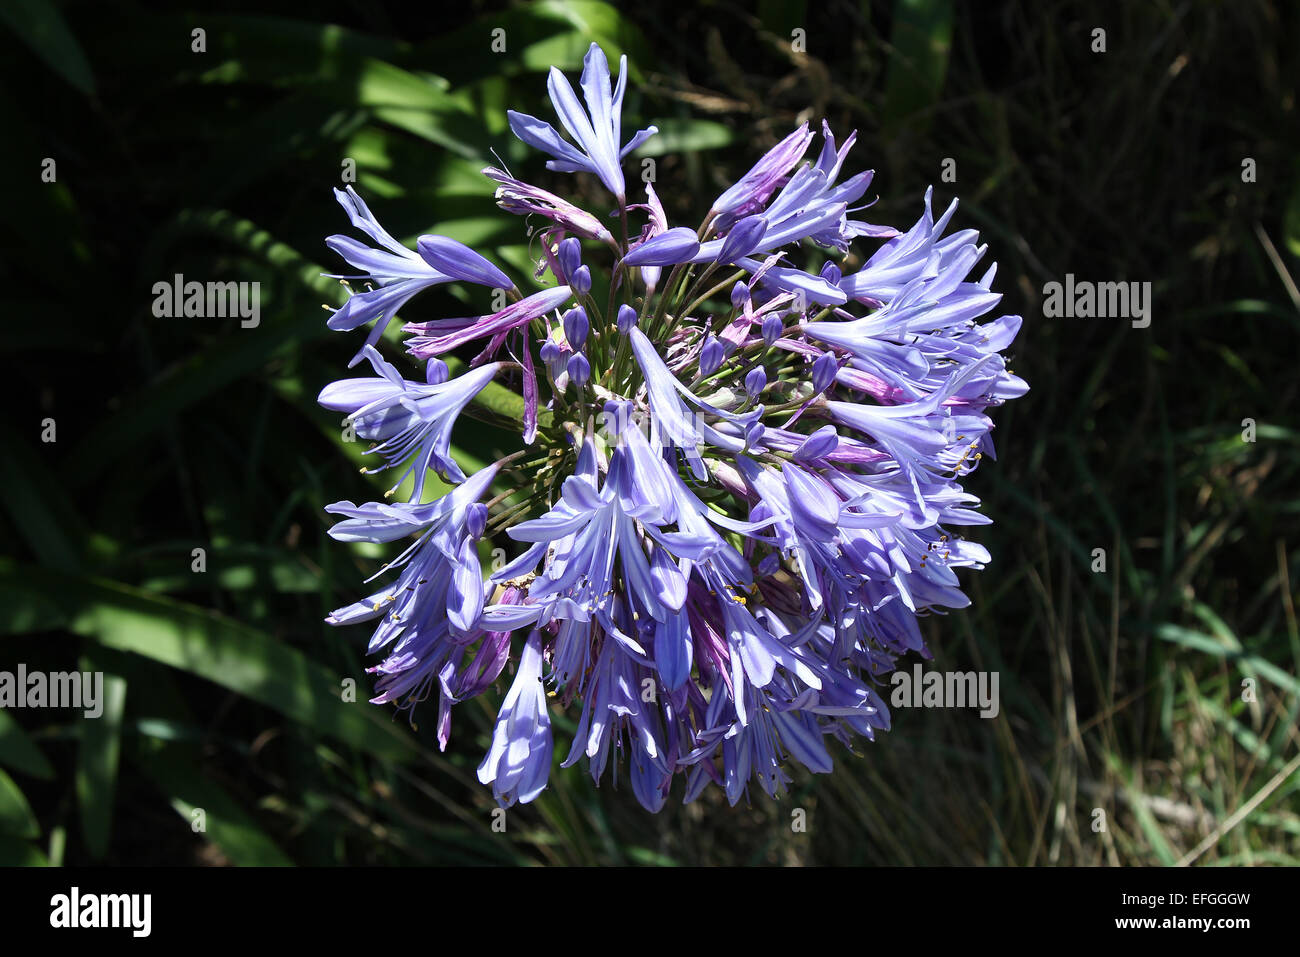 Agapanthus that is commonly found along the Great Ocean Road in Australia Stock Photo